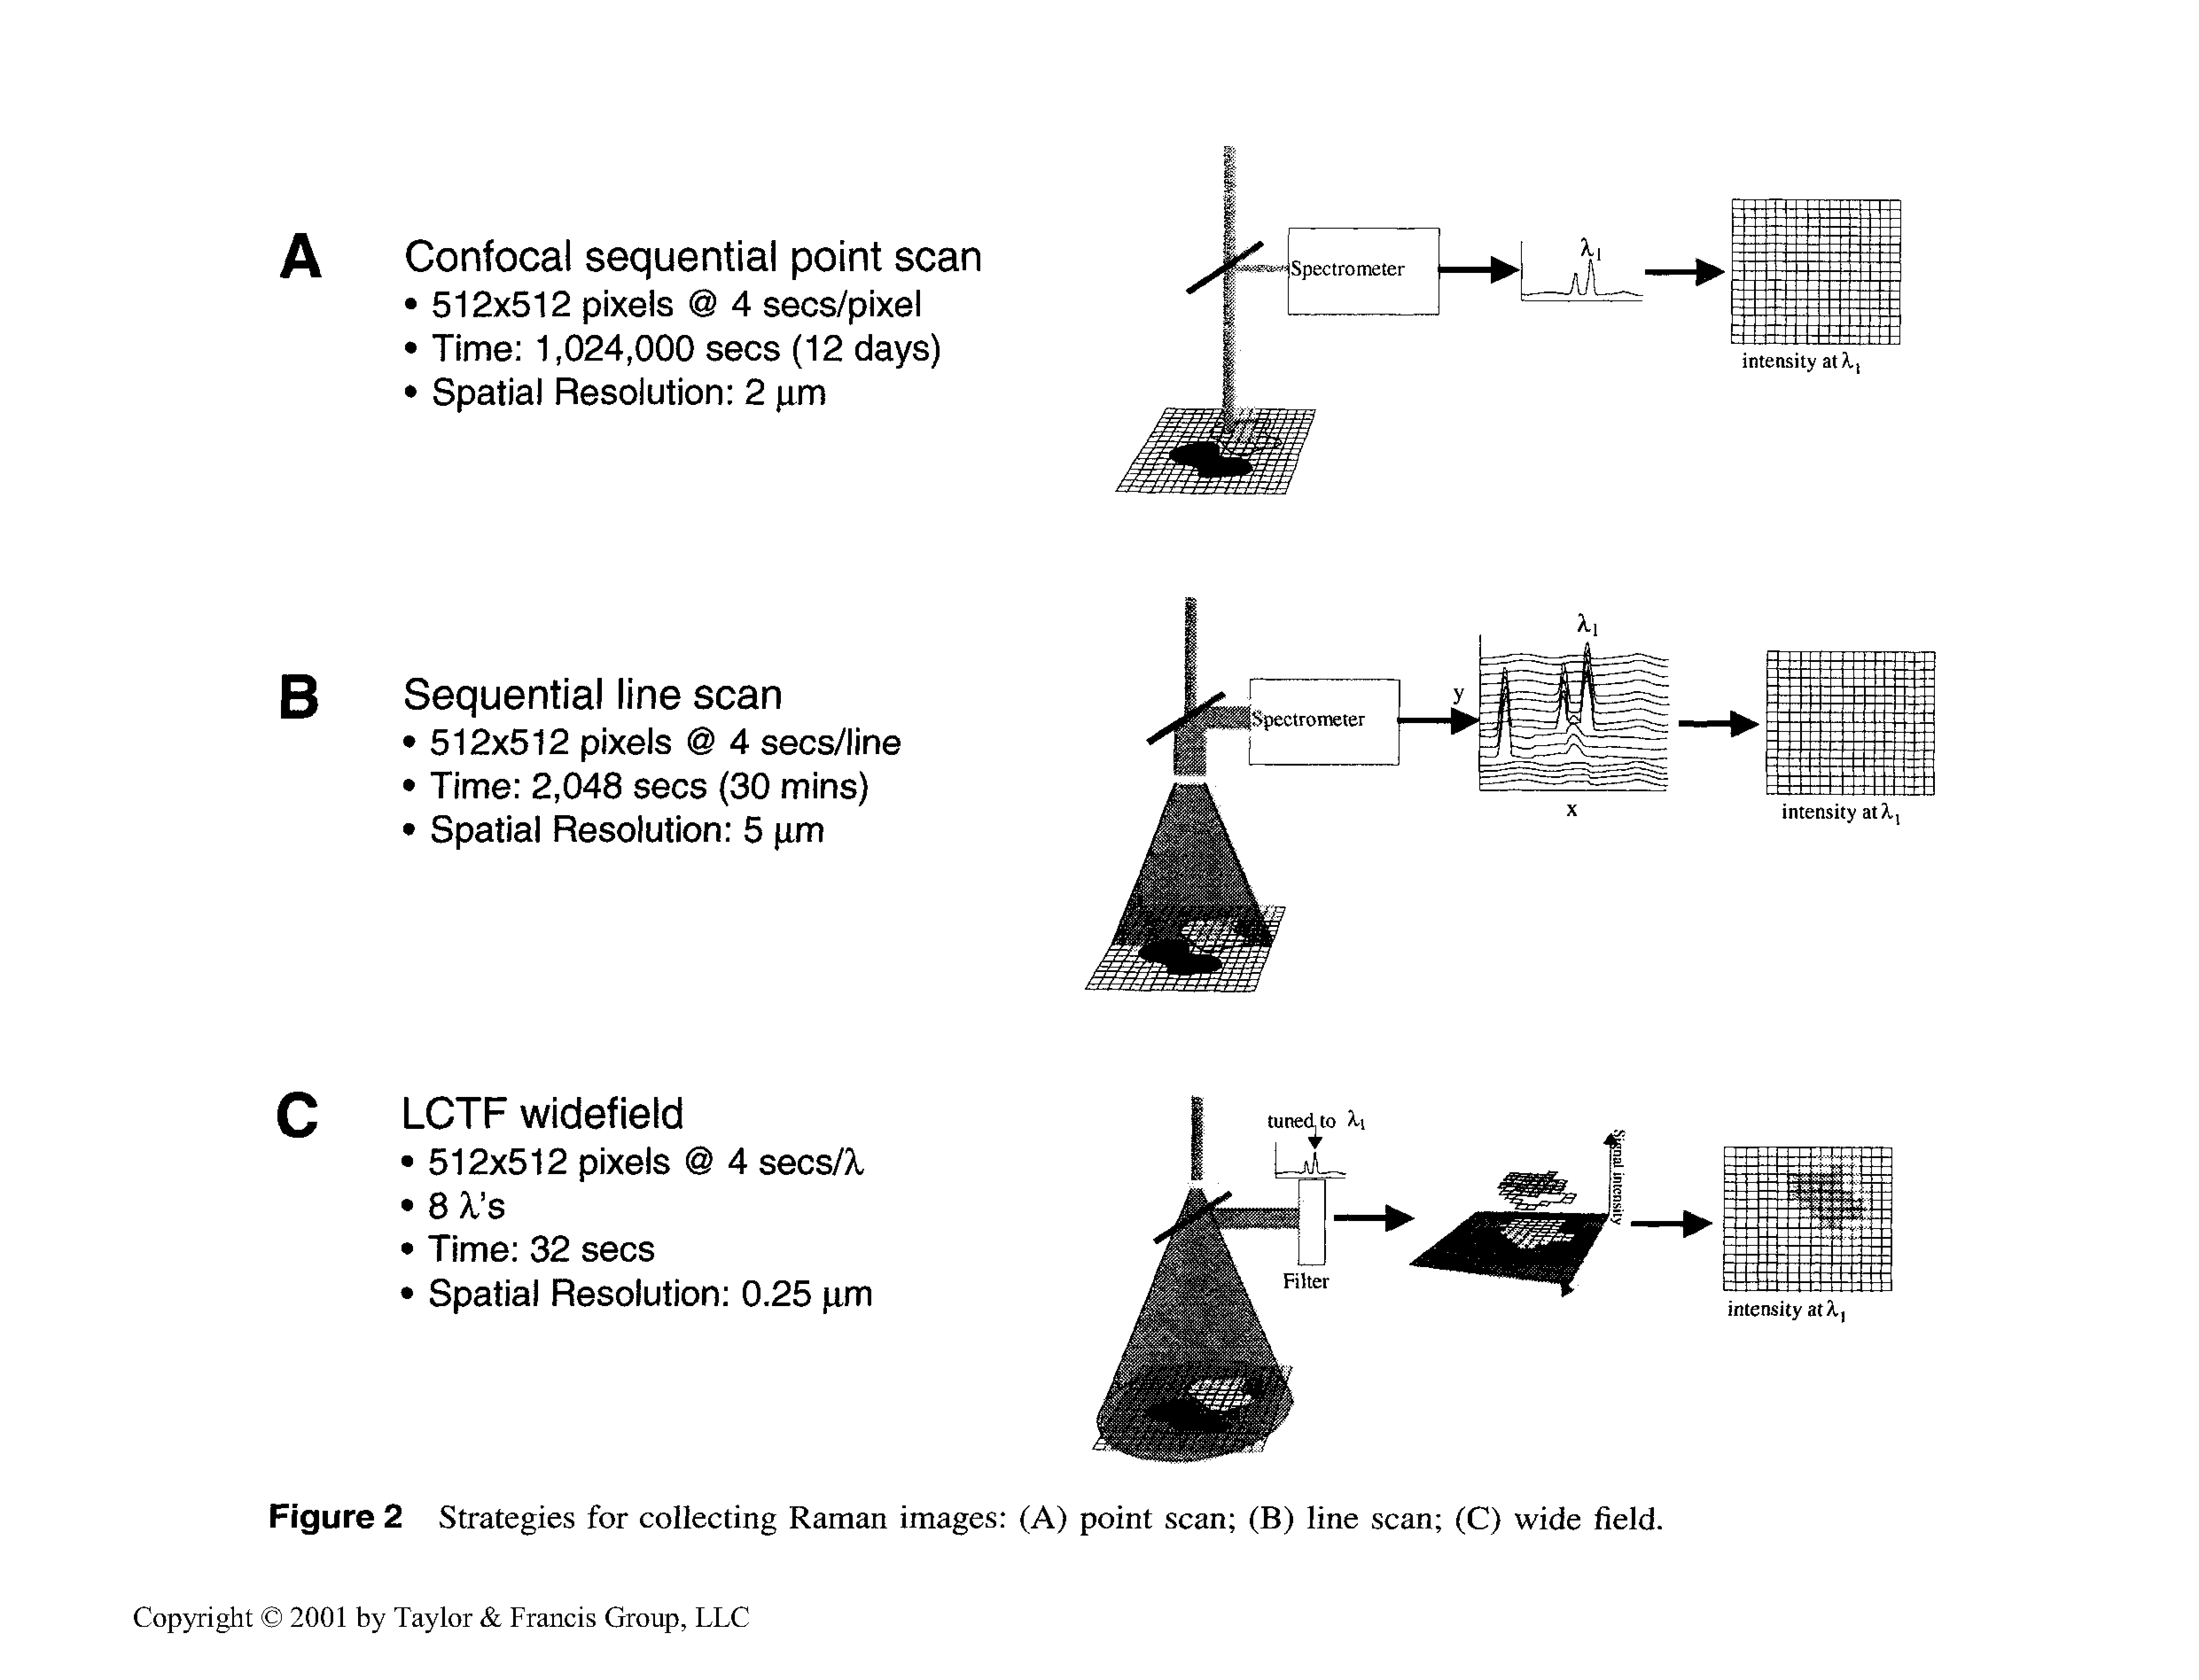 Figure 2 Strategies for collecting Raman images (A) point scan (B) line scan (C) wide field.